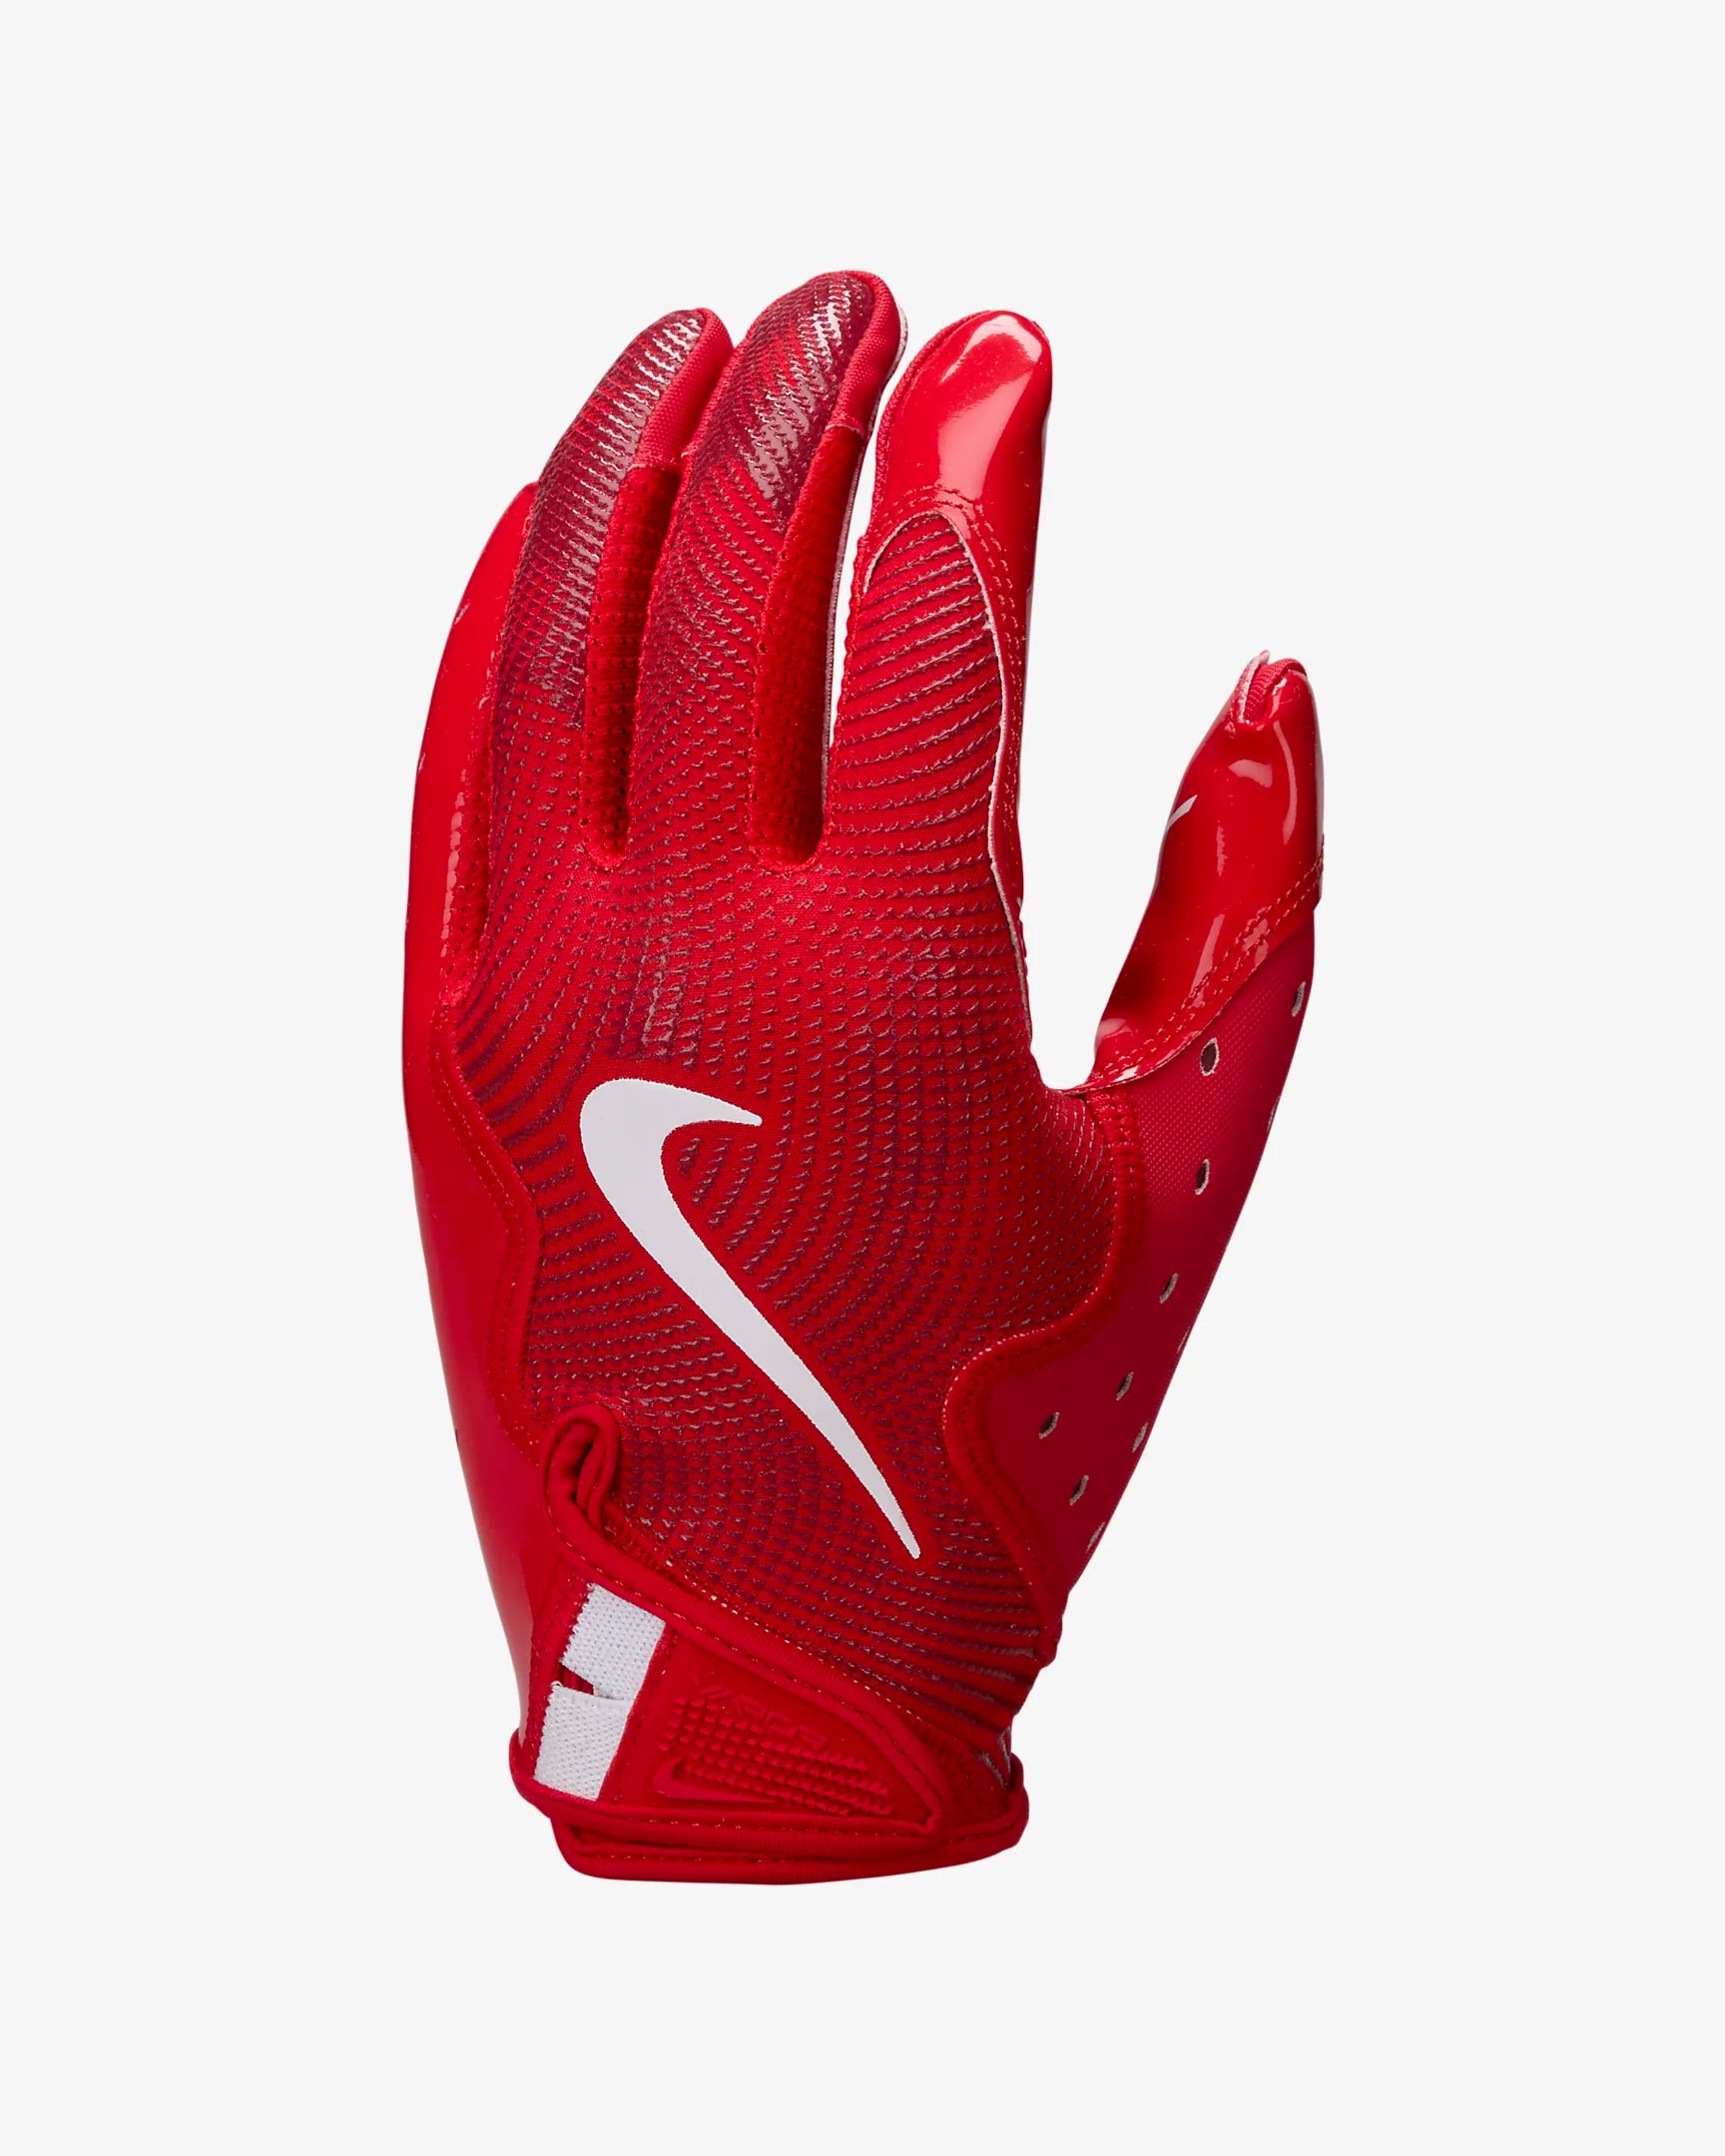 A photo of the Nike Vapor Jet 8.0 Football Gloves in colour red with white nike check